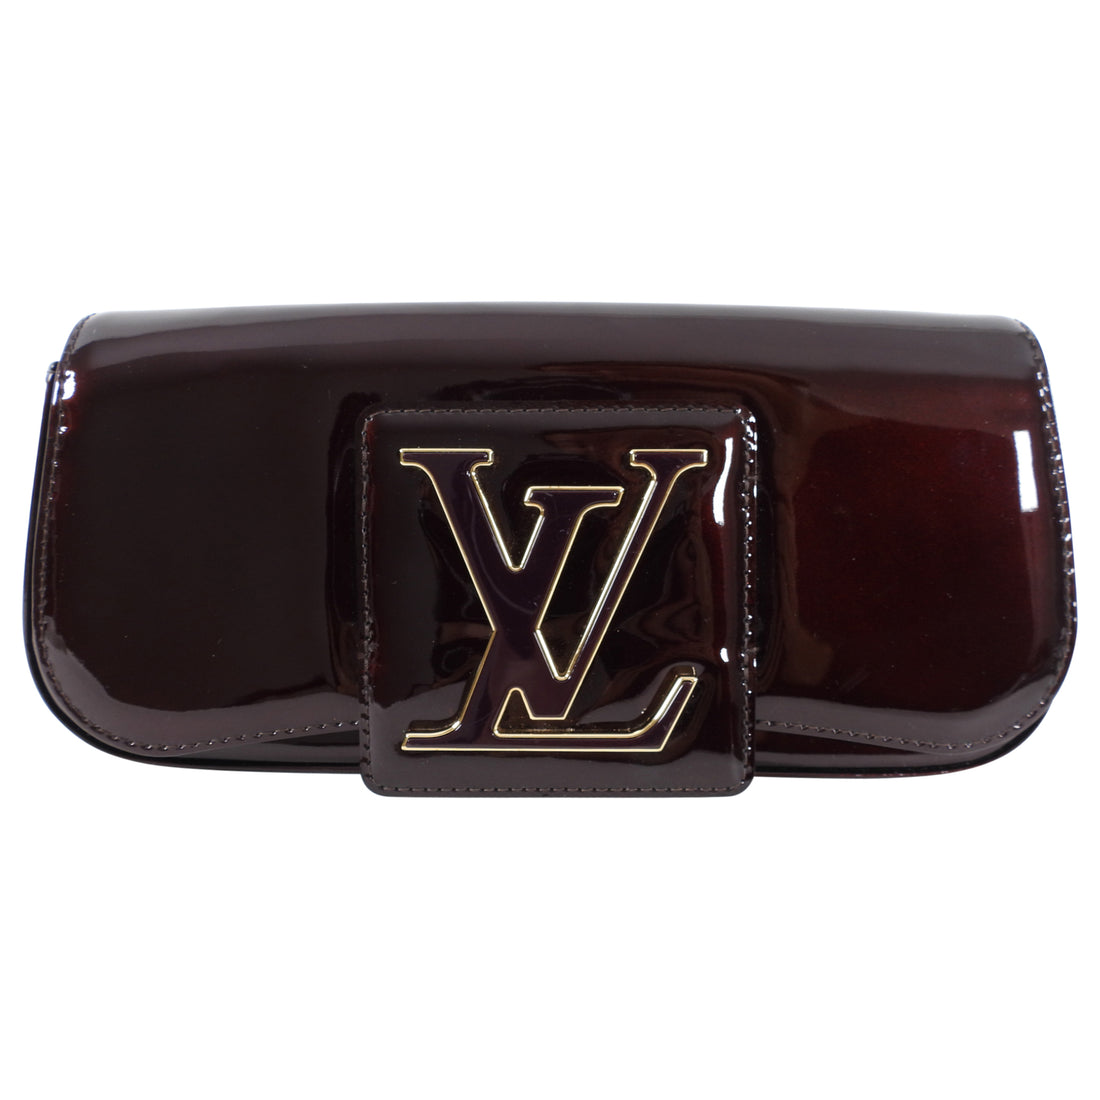 Leather clutch bag Louis Vuitton Other in Leather - 14089971